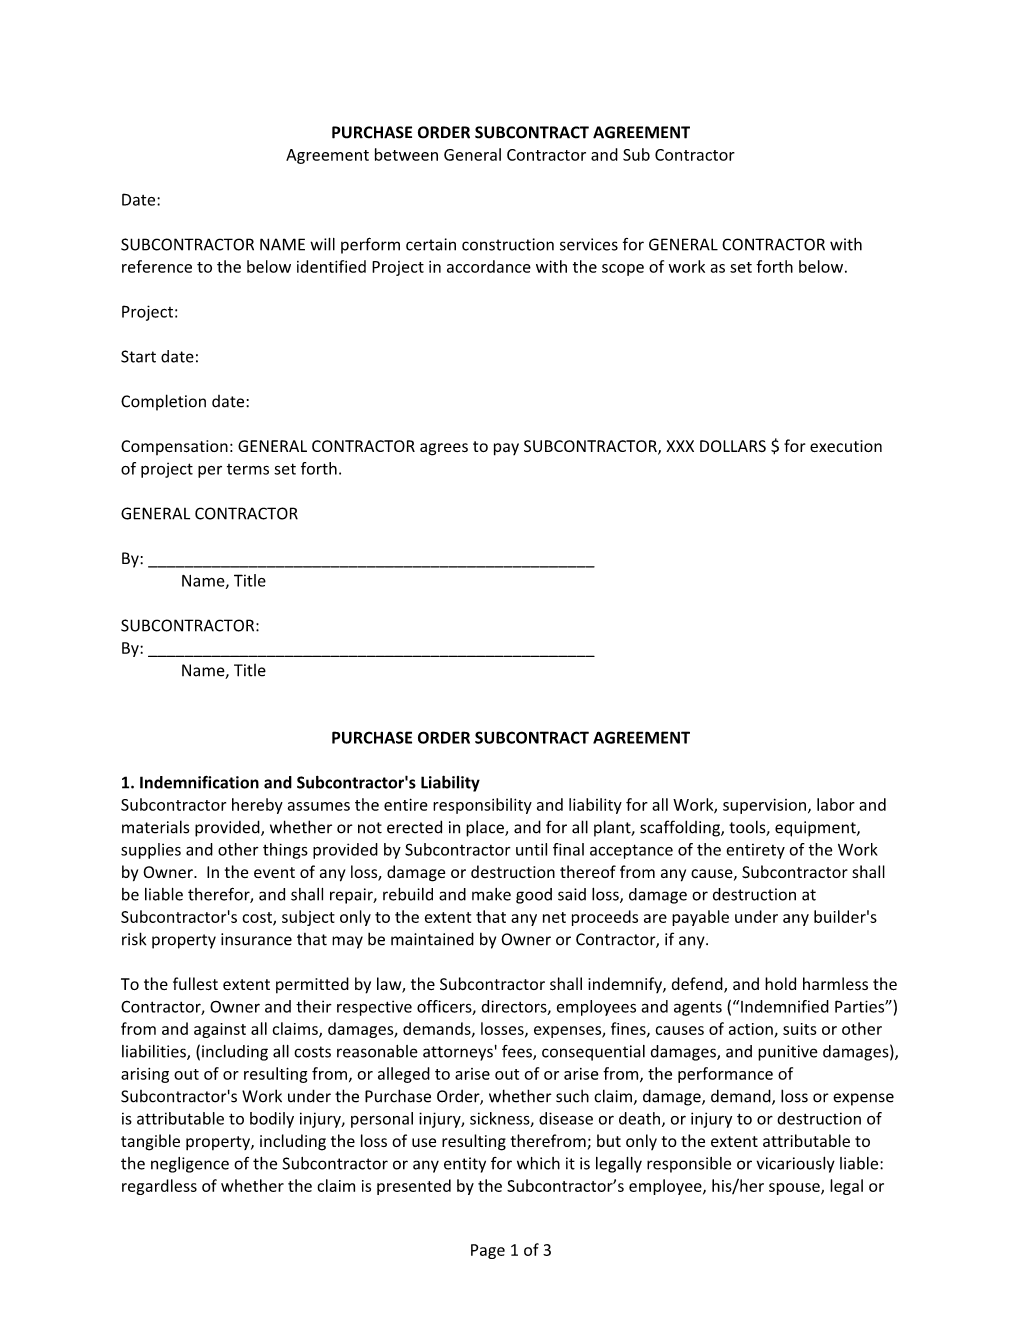 Purchase Order Subcontract Agreement